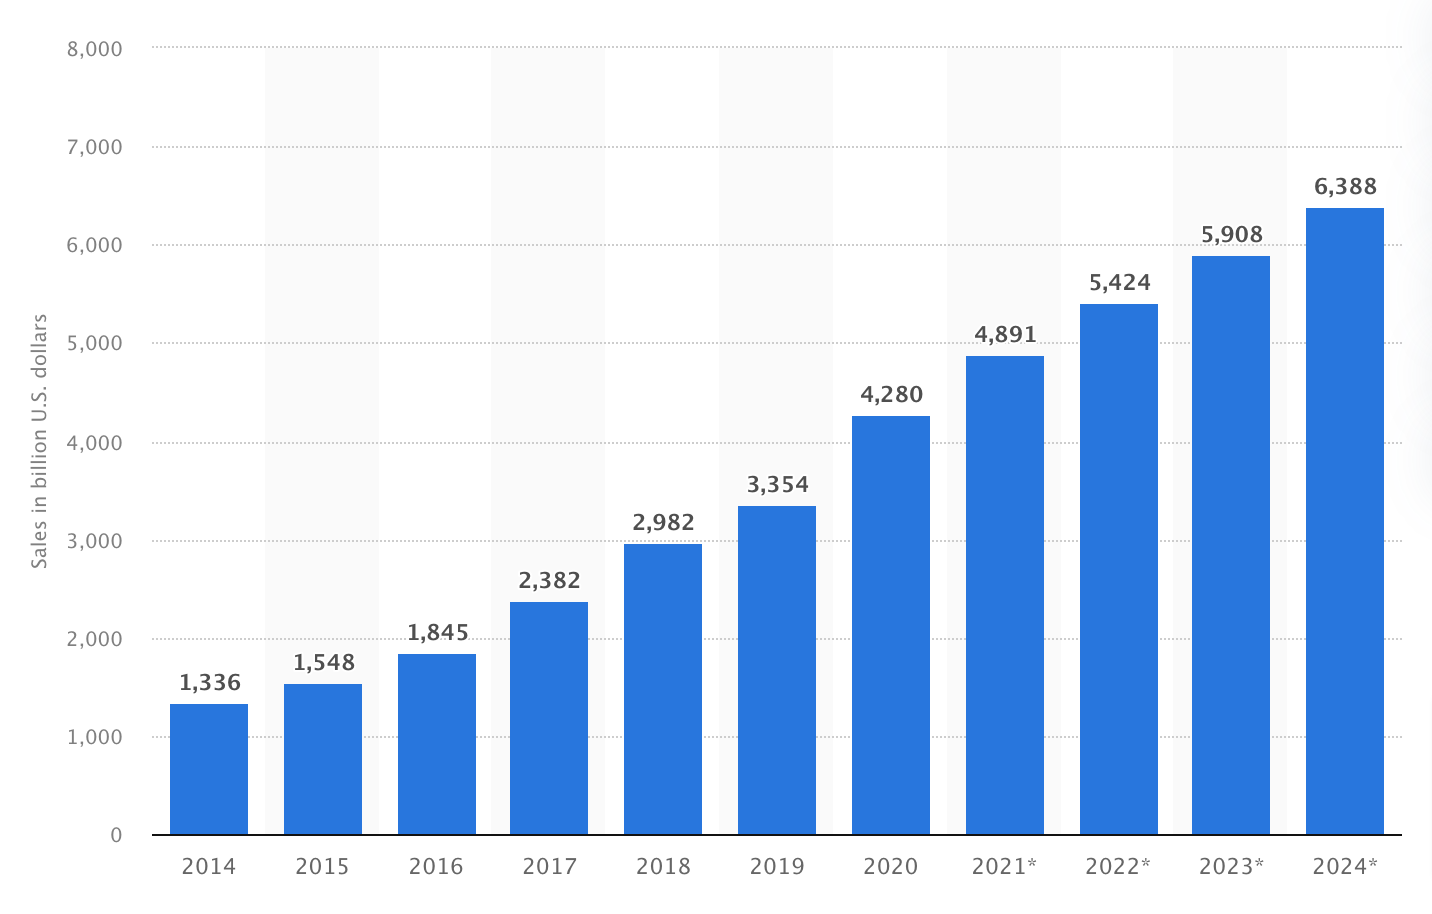 Global retail e-commerce market size 2014 to 2023 - Statista